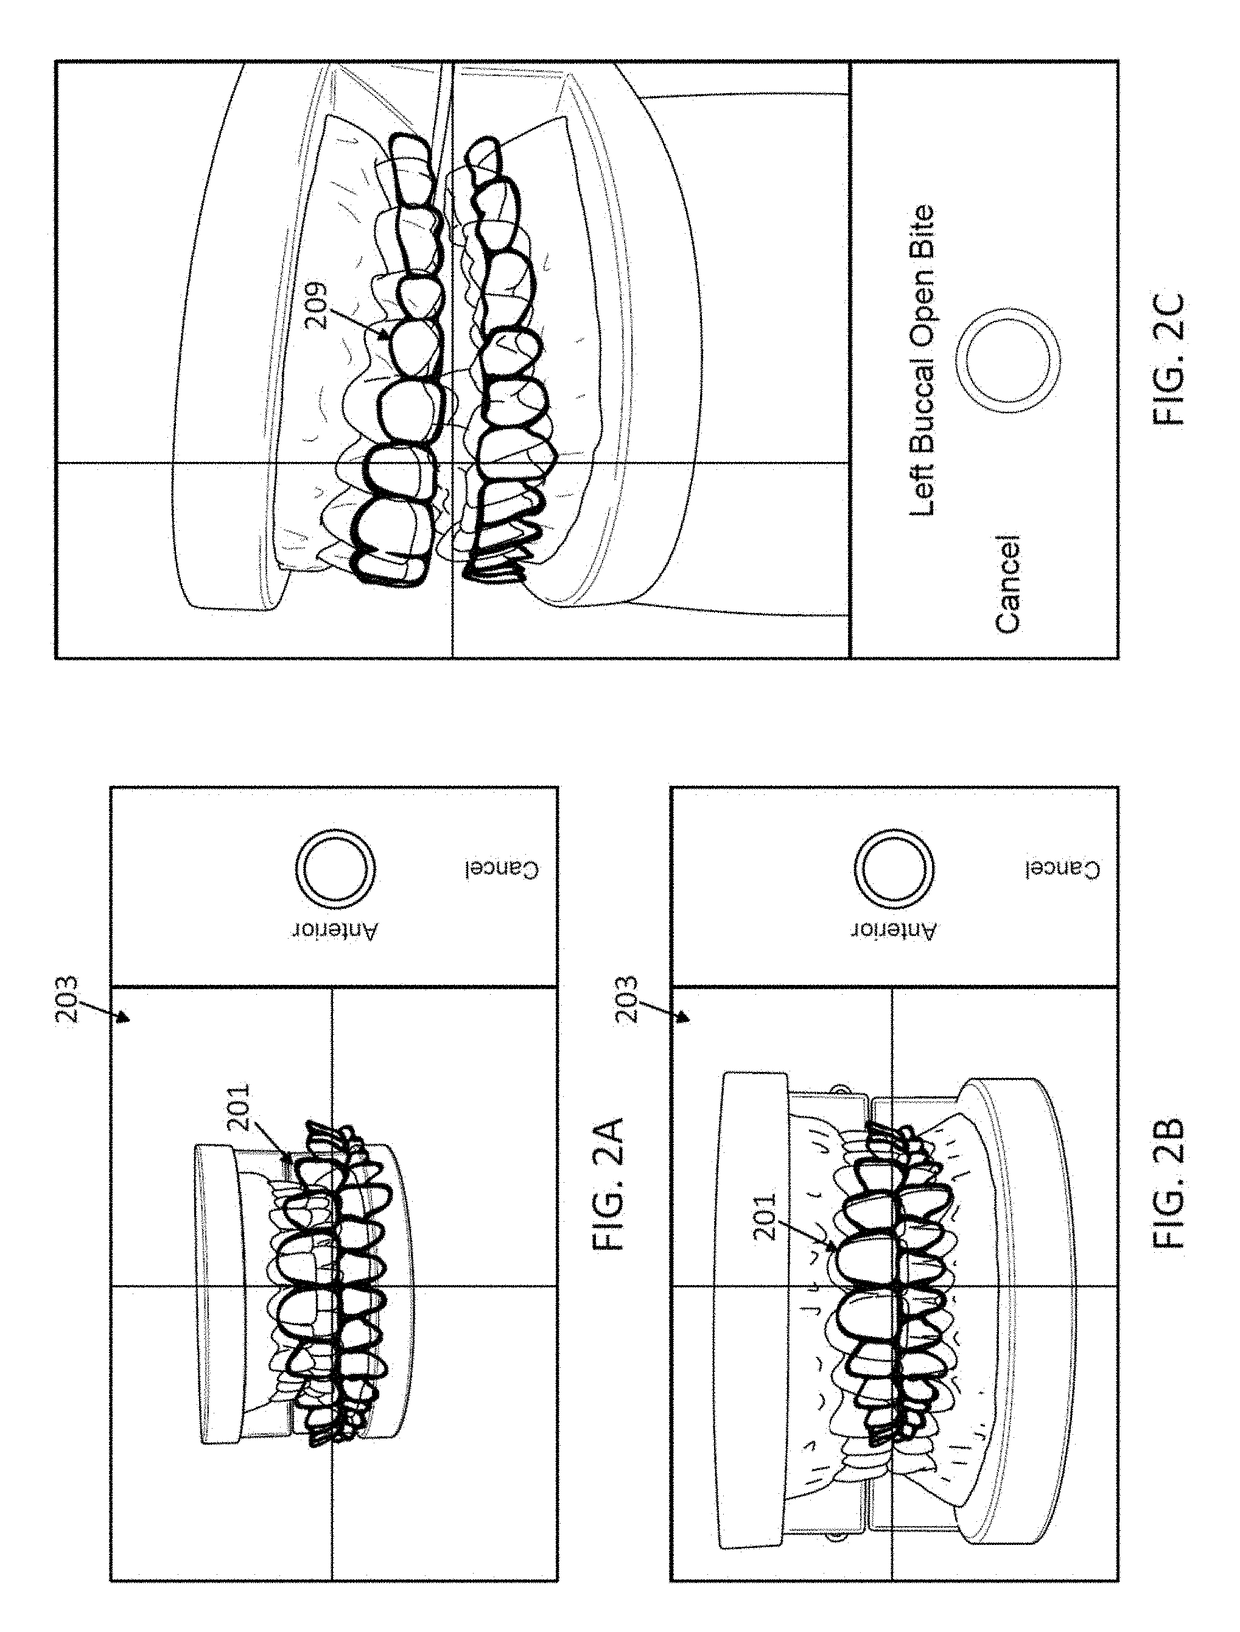 Methods and apparatuses for dental images